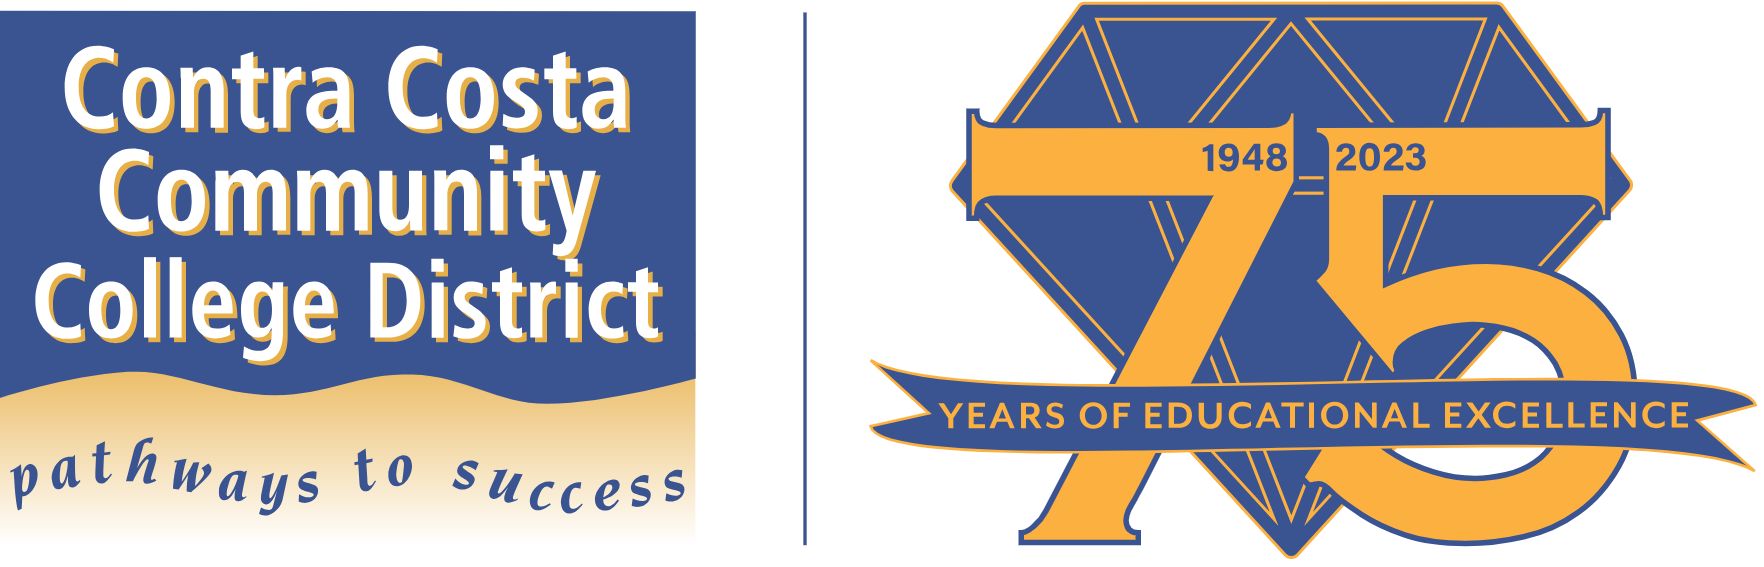 Contra Costa Community College District pathways to success - 1948-2023 75 Years of Educational Excellence - logo